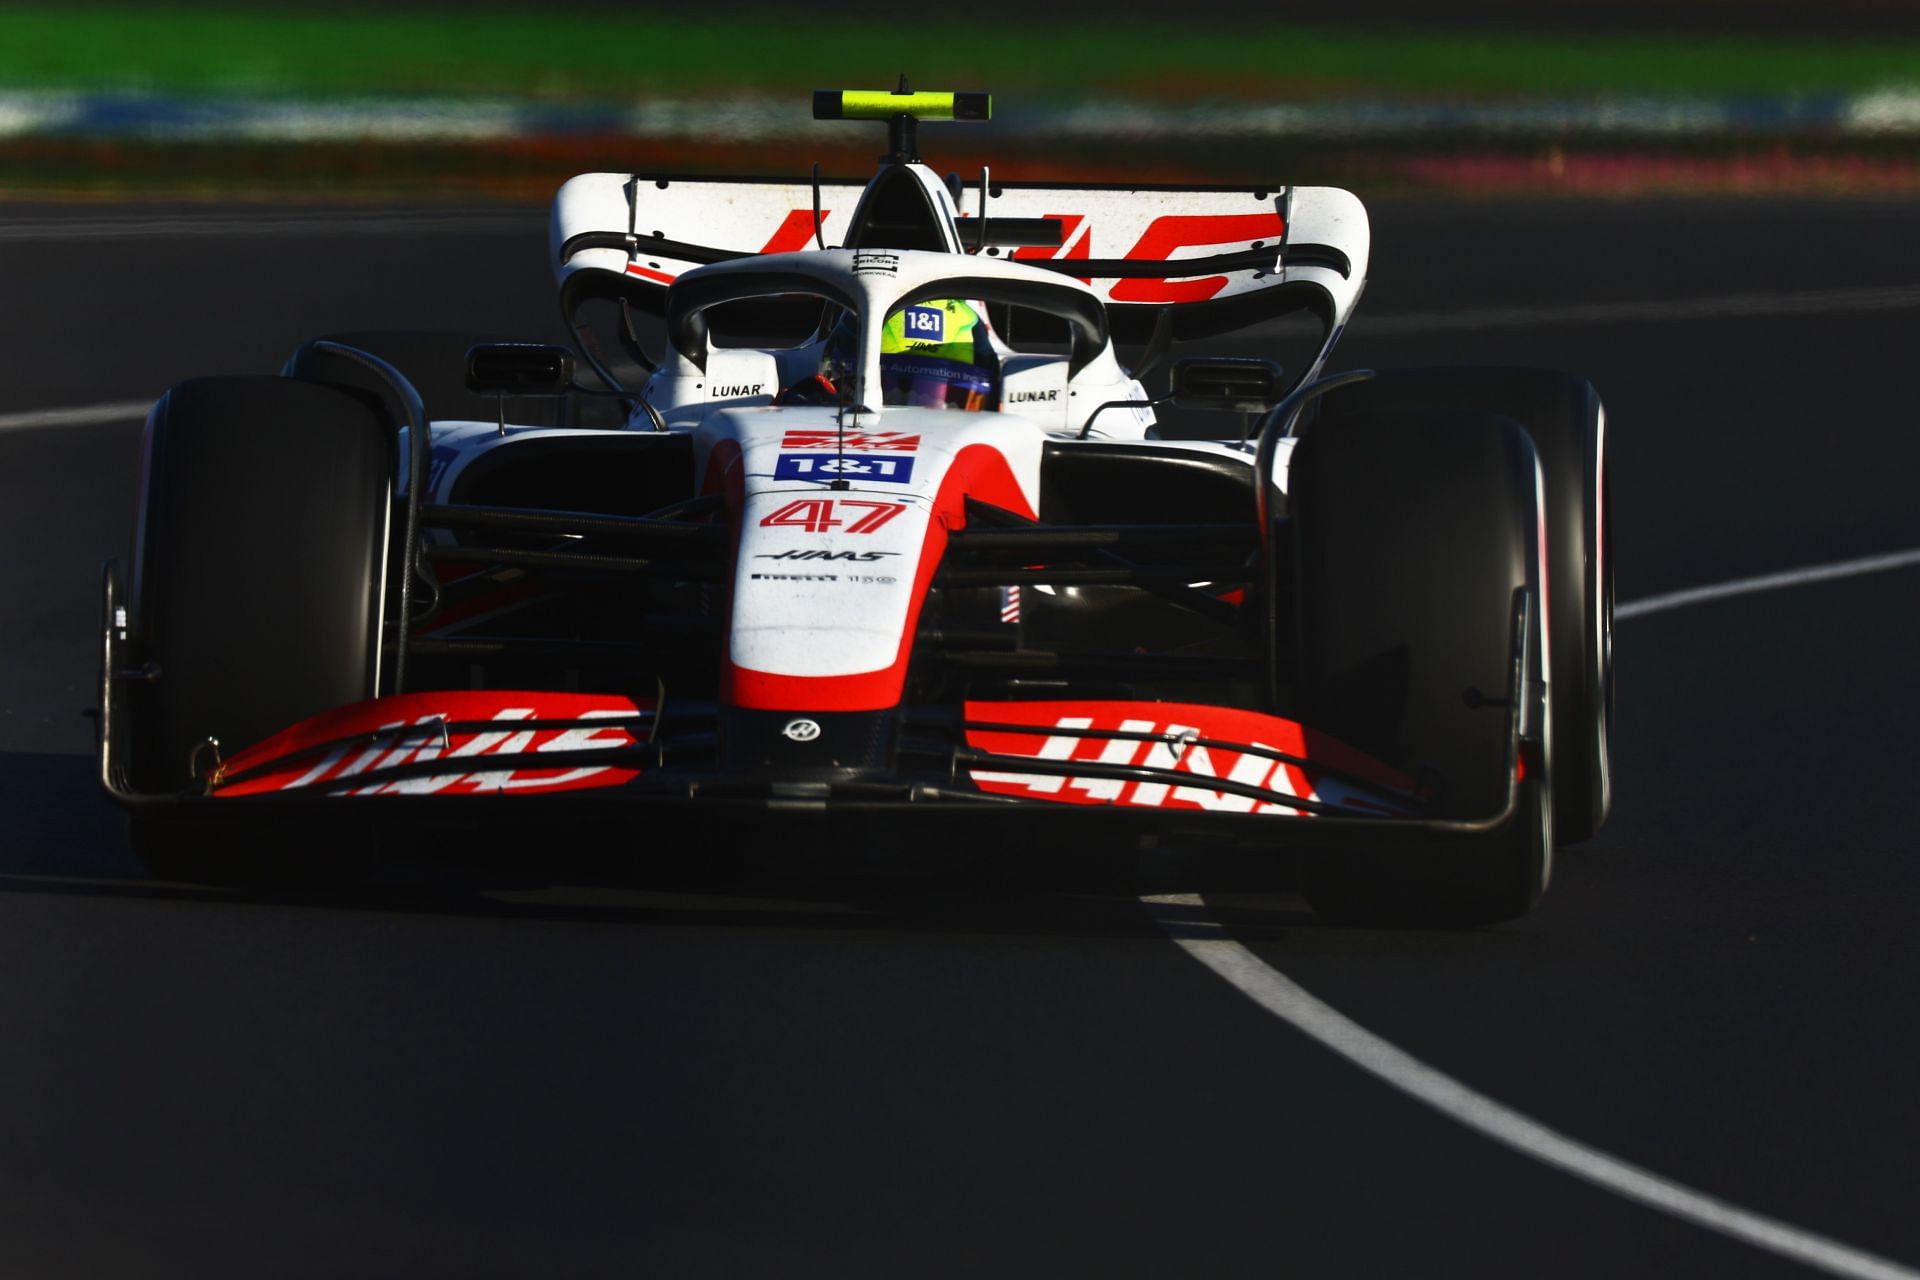 Haas faced a drop in form in Australia